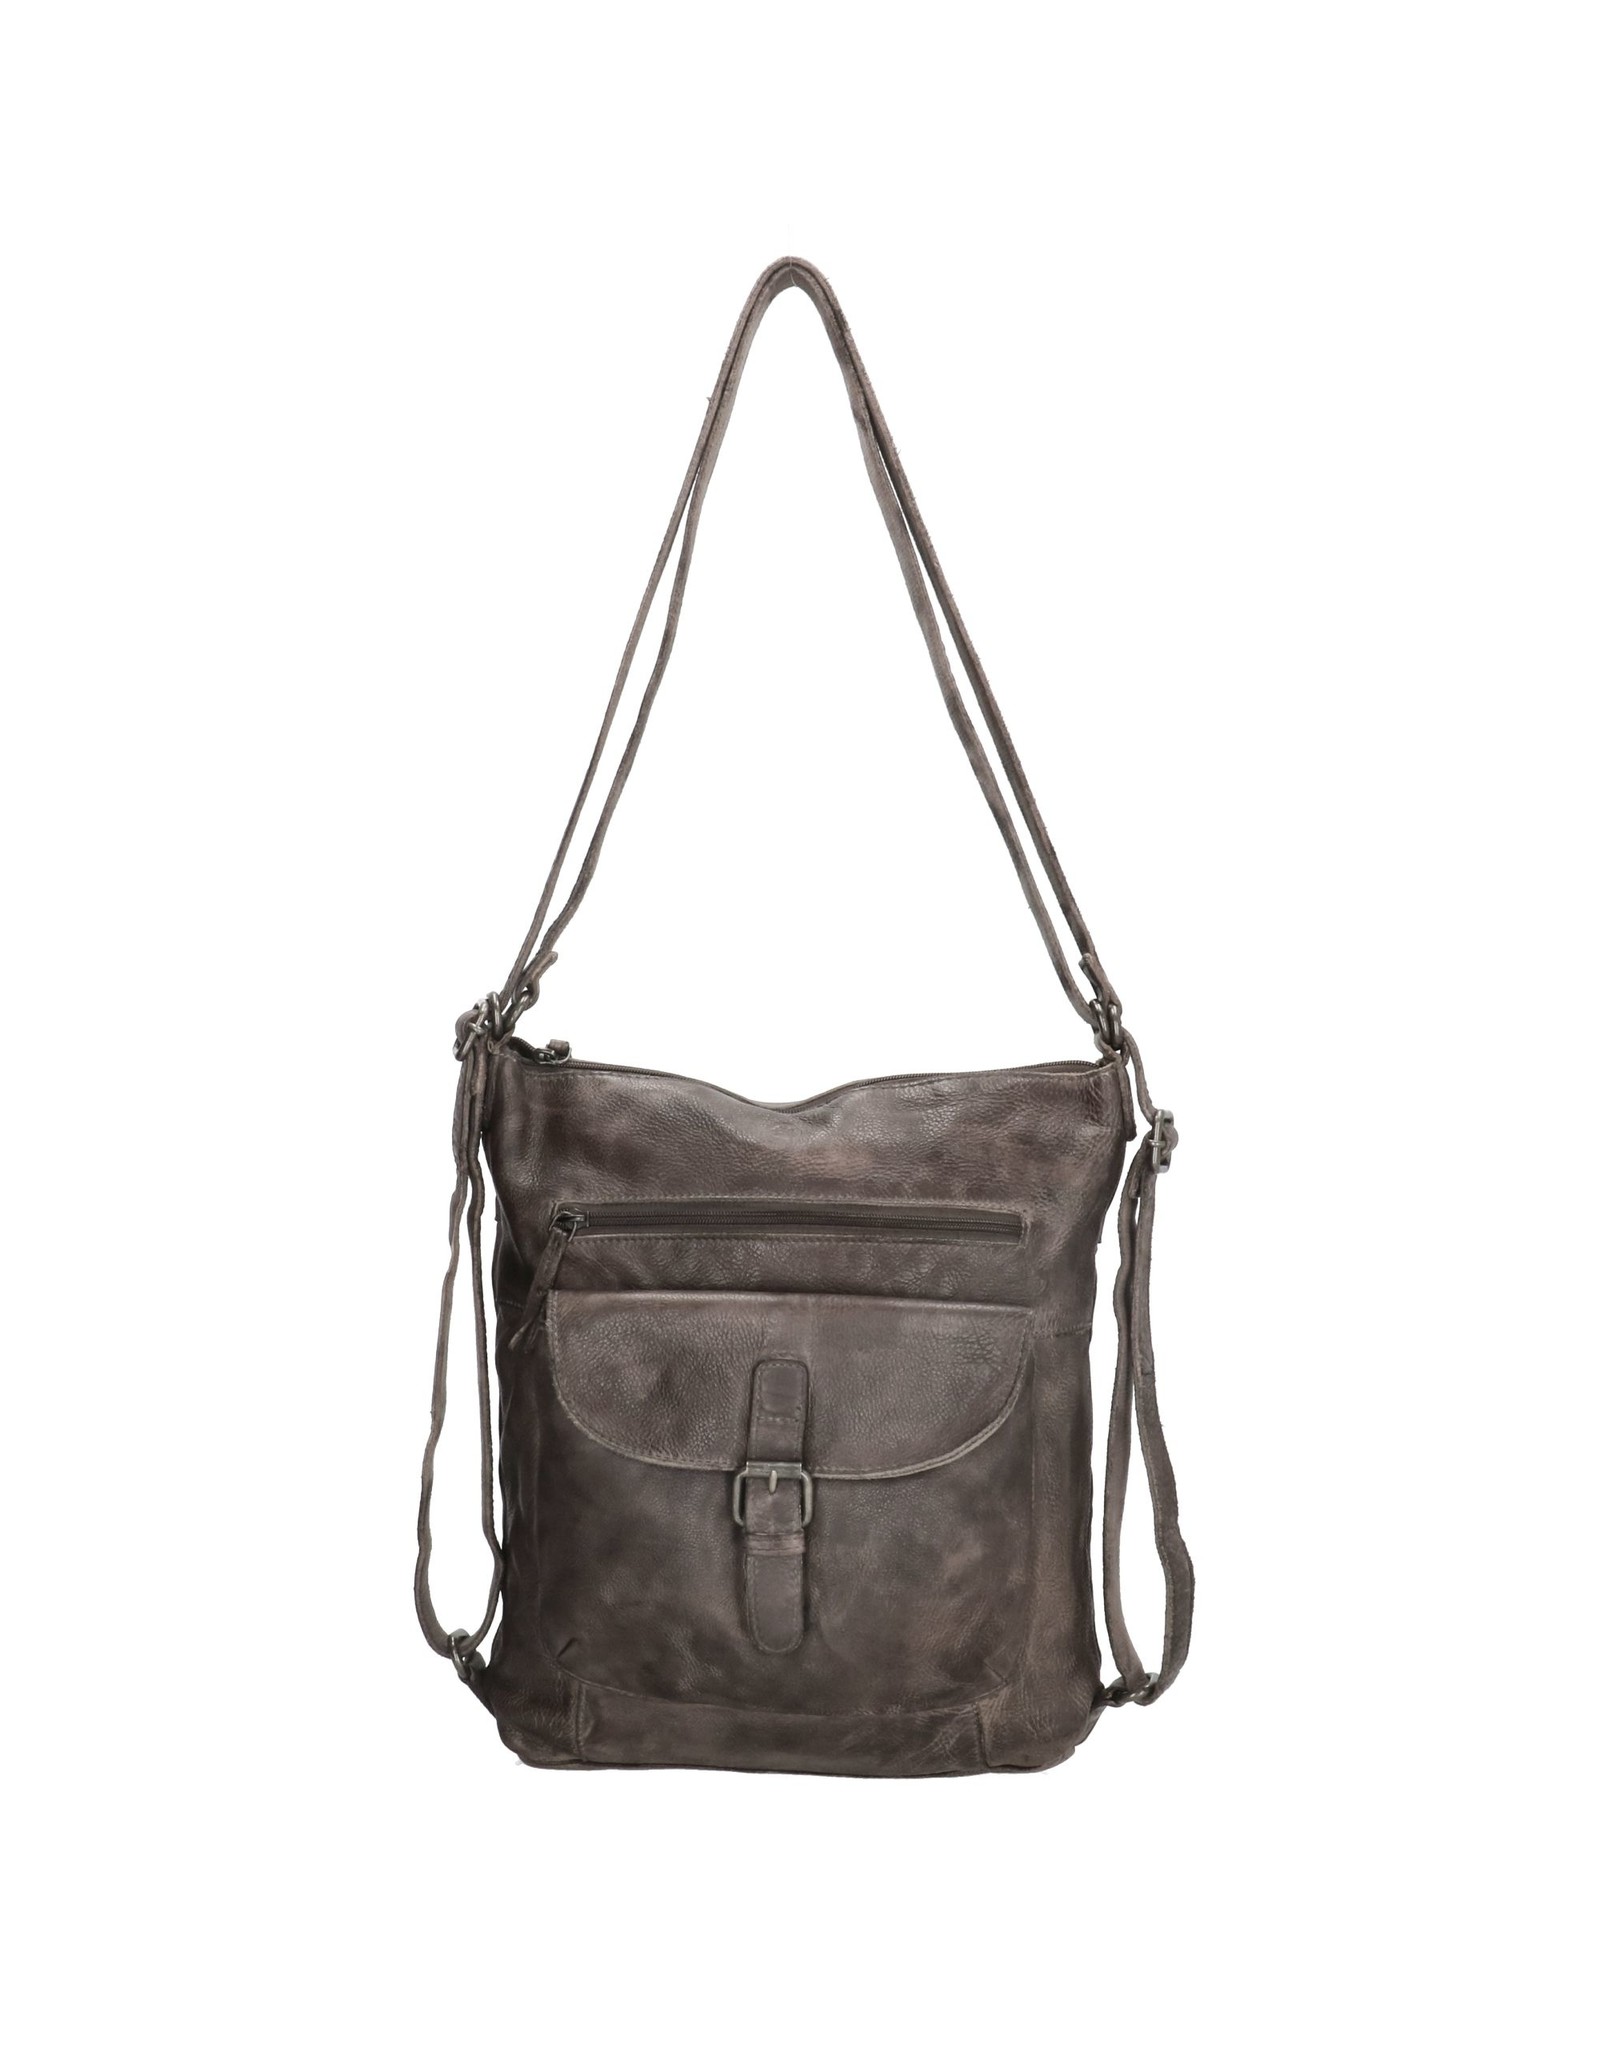 Hide & Stitches Leather backpacks Leather shoppers - Hide & Stitches Paint Rock Backpack - Shoulder bag taupe